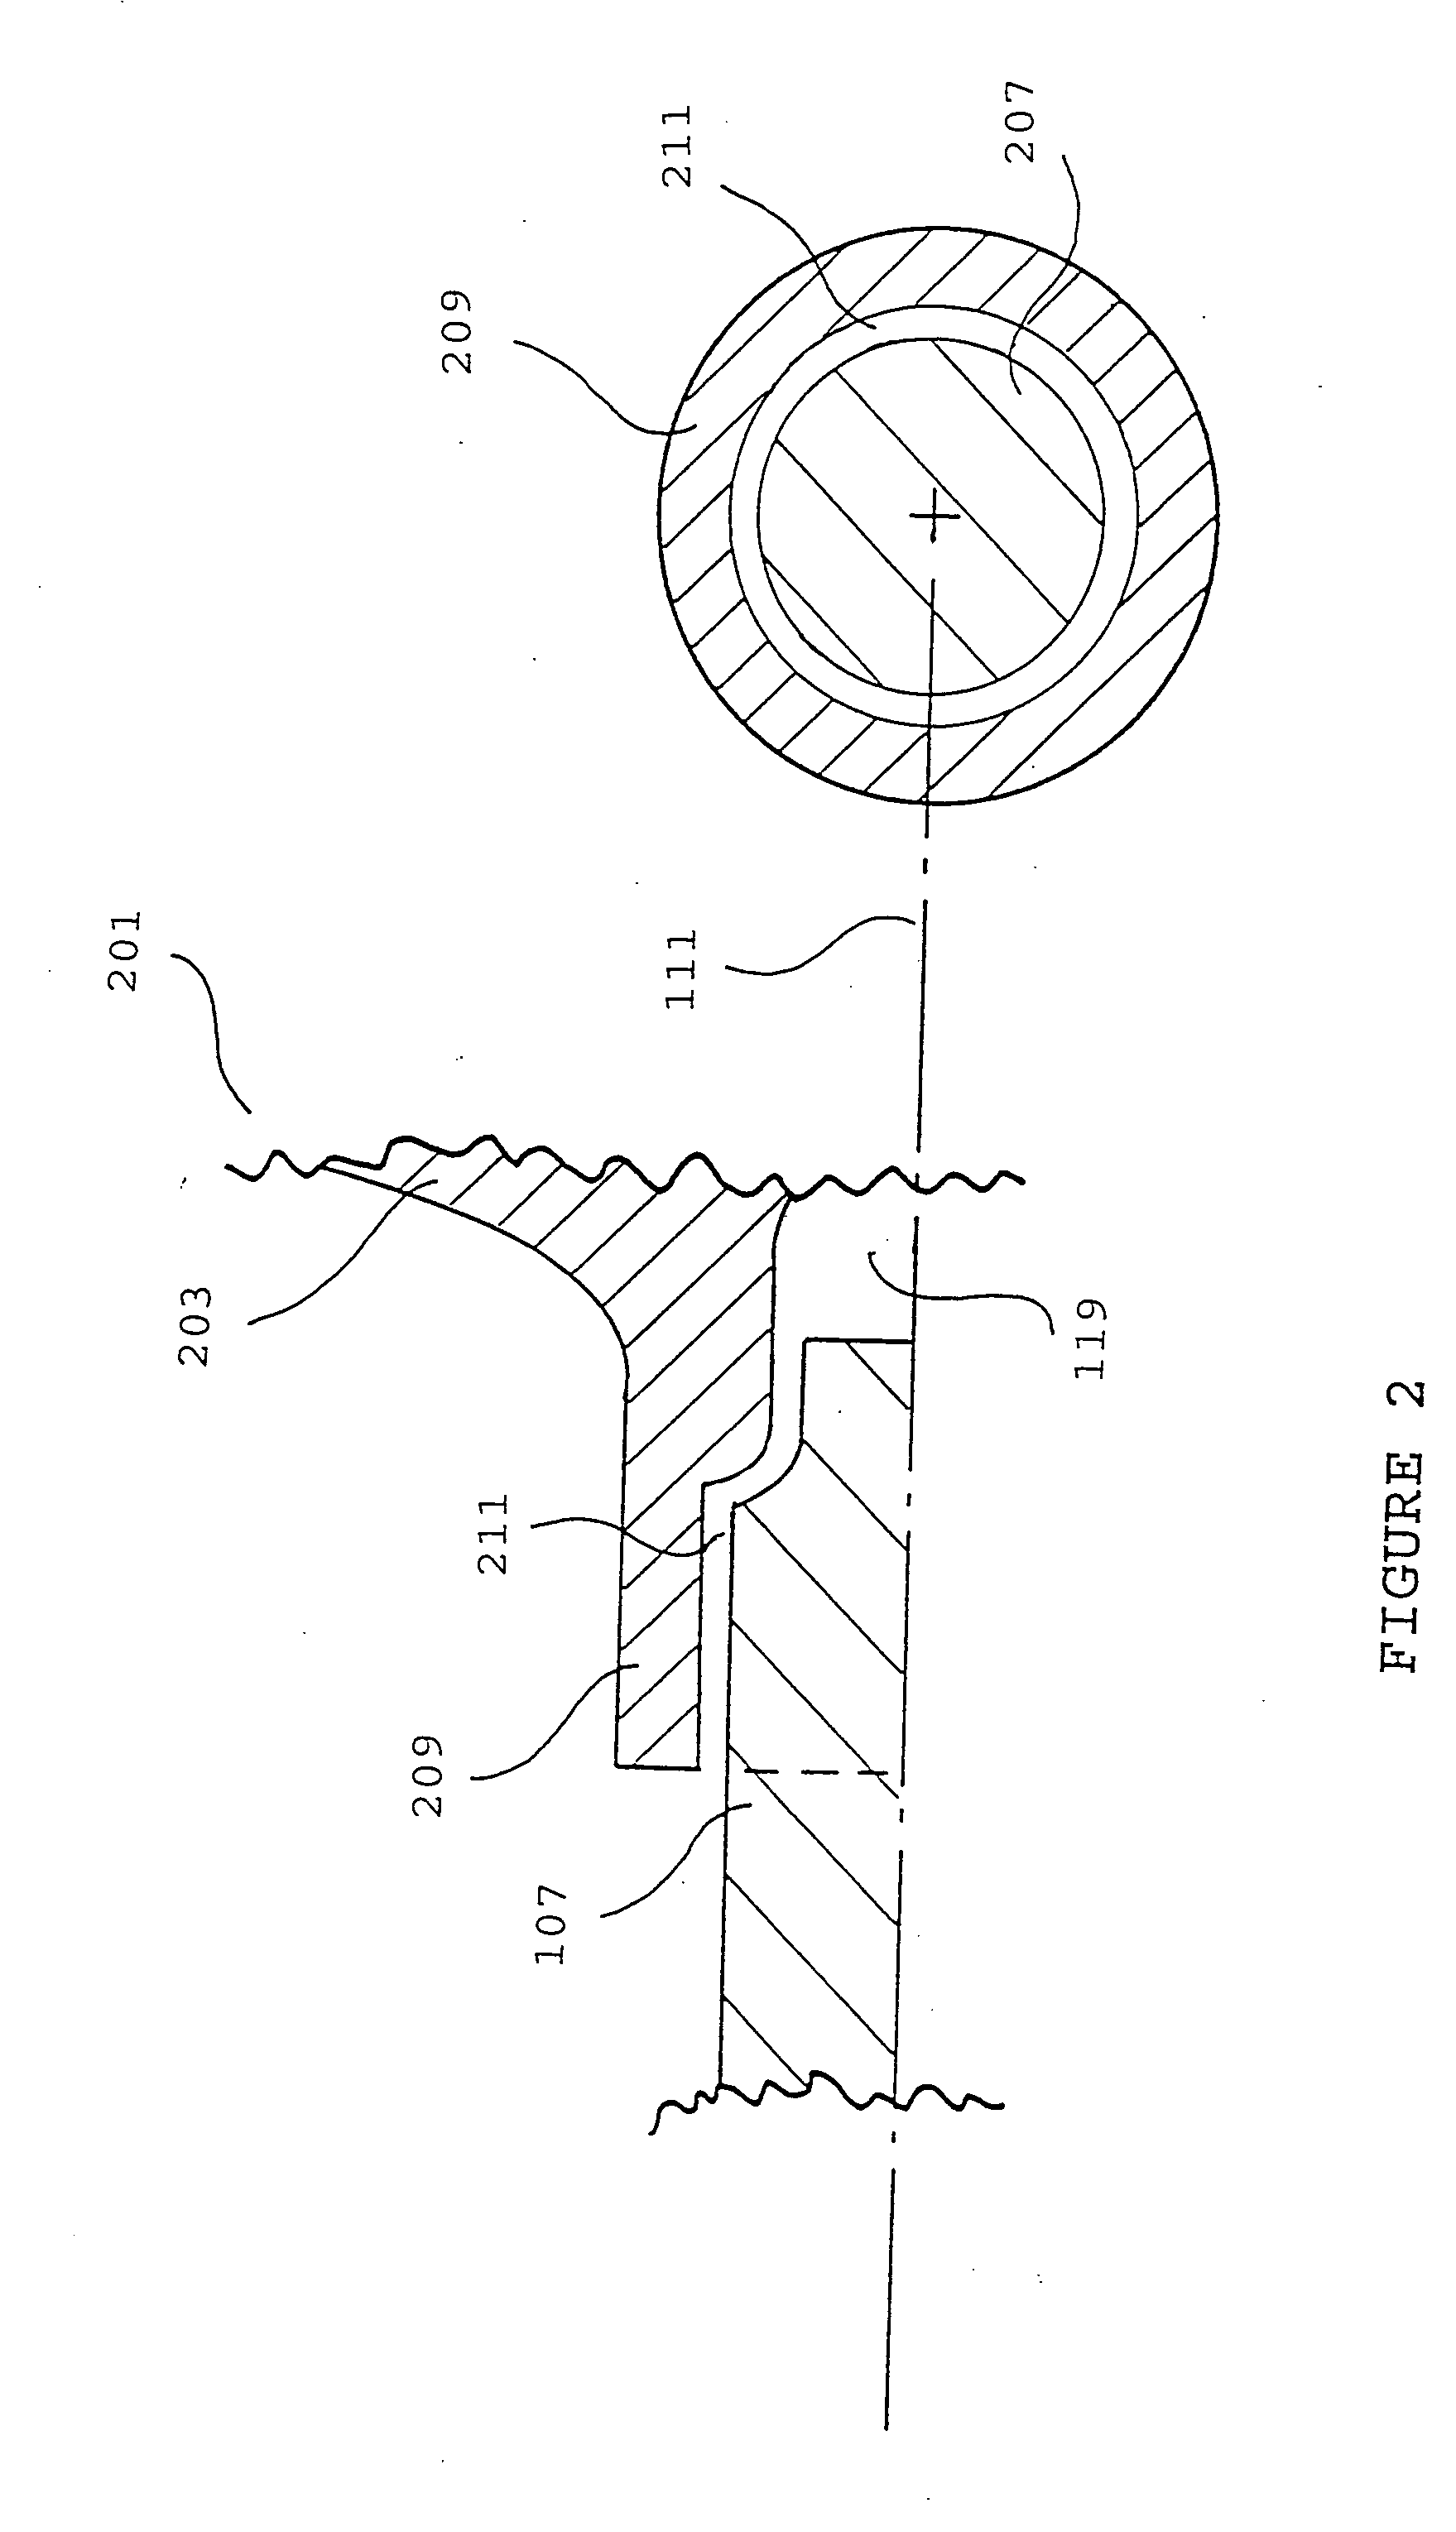 Metal injection molded turbine rotor and metal shaft connection attachment thereto